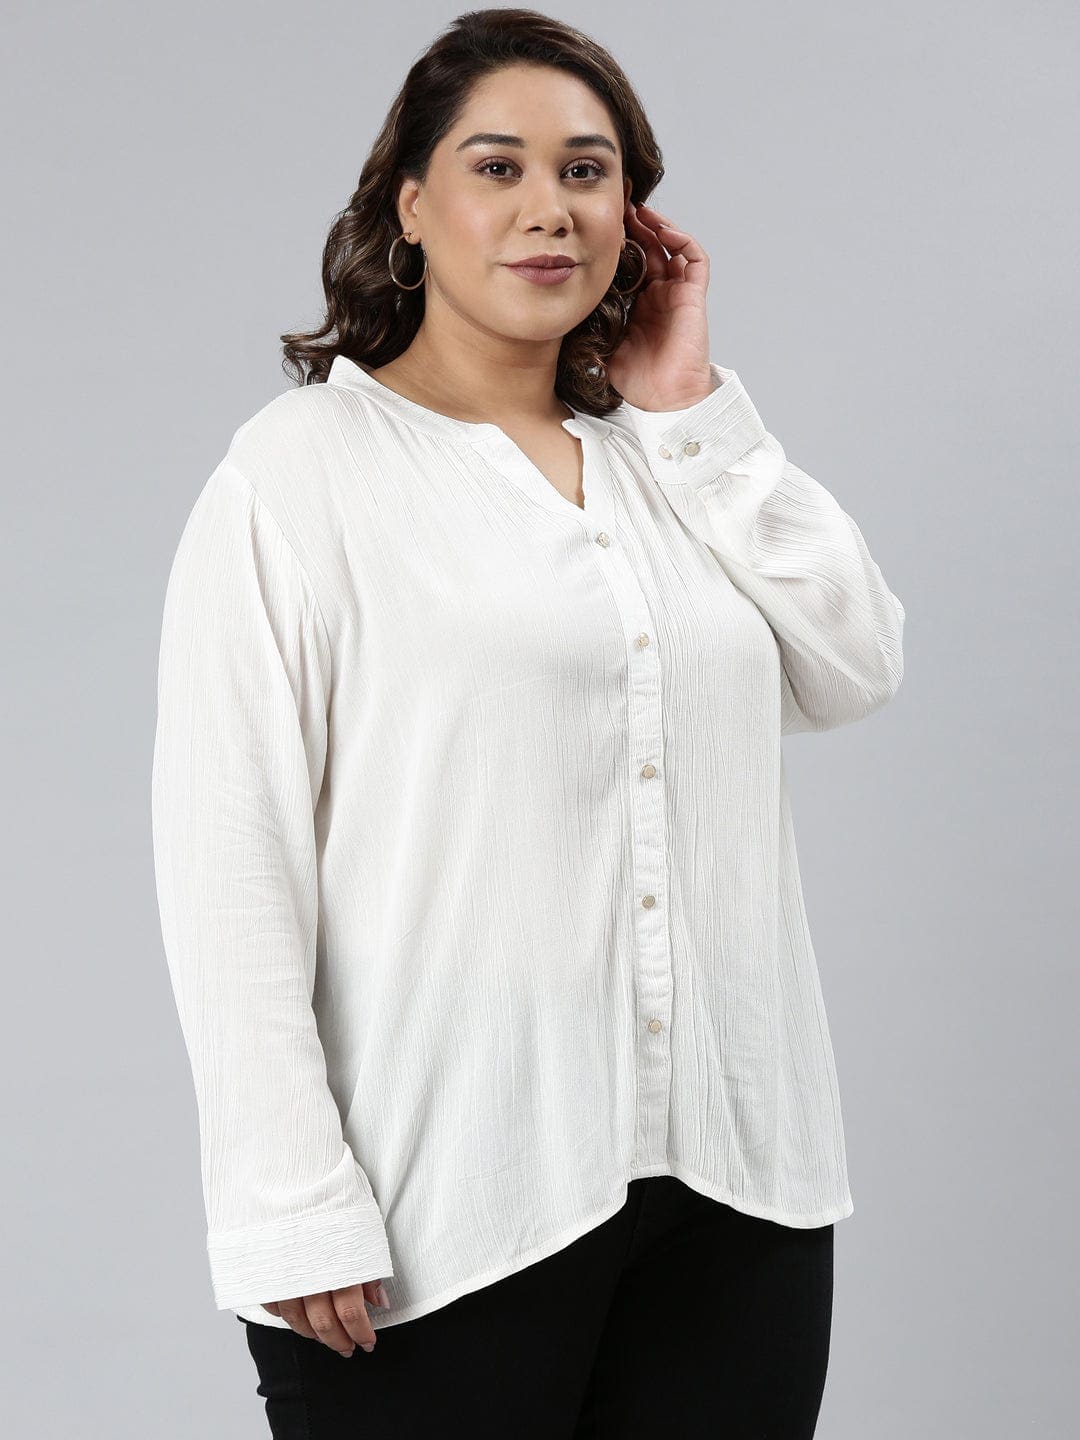 White shirt with full sleeves